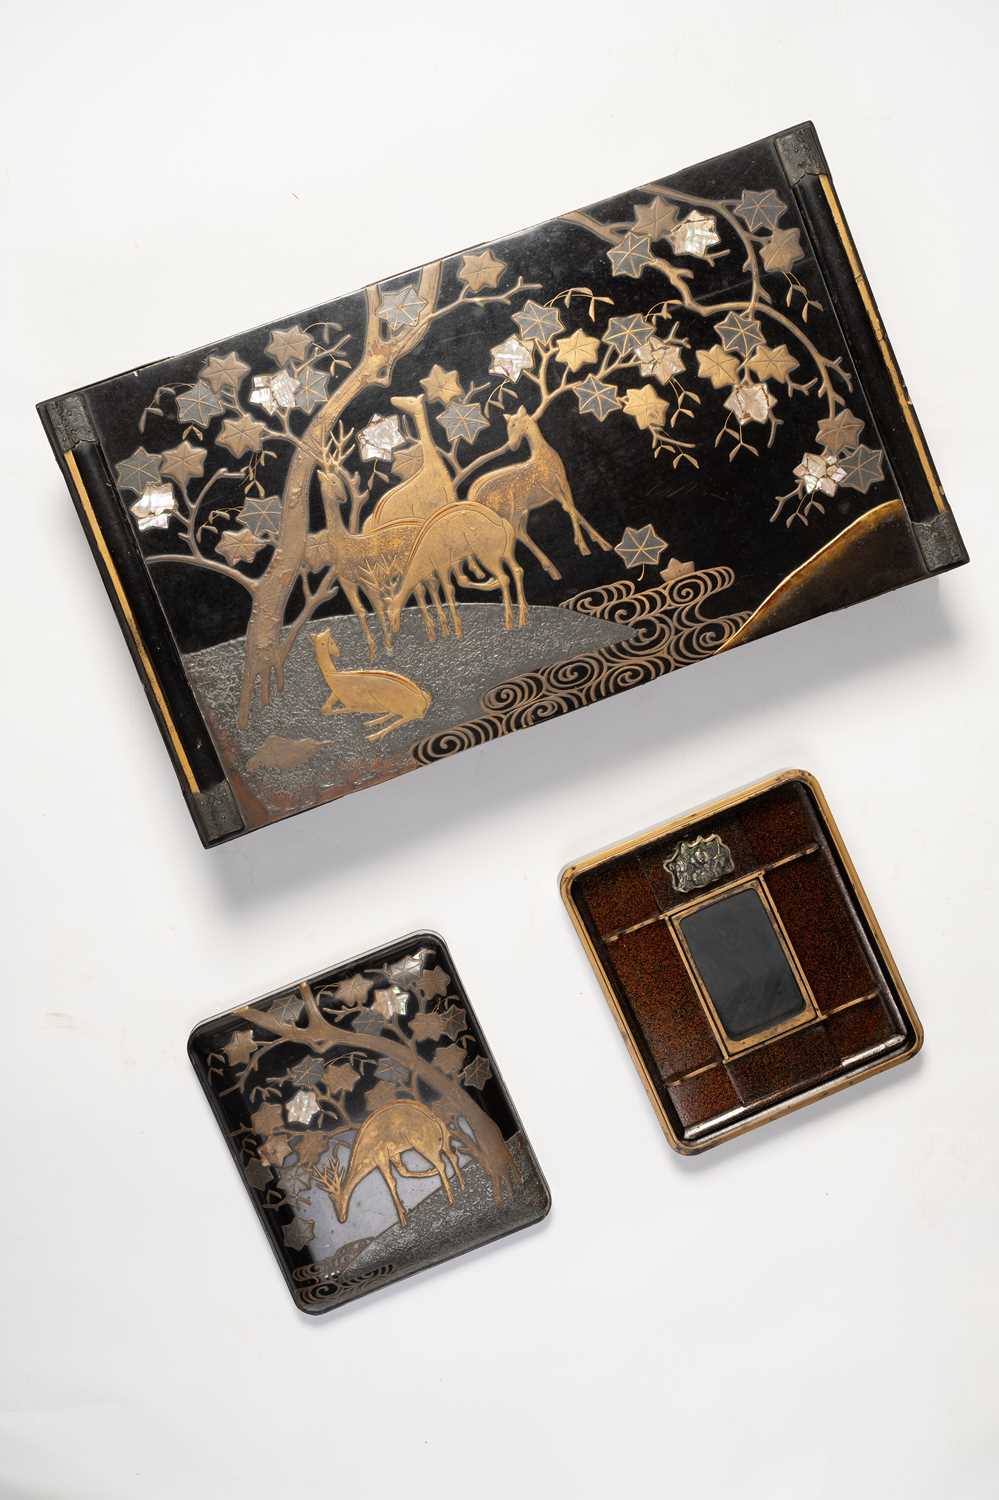 NO RESERVE A JAPANESE LACQUER BUNDAI (WRITING TABLE) AND MATCHING SUZURIBAKO (WRITING BOX) AFTER - Image 3 of 6